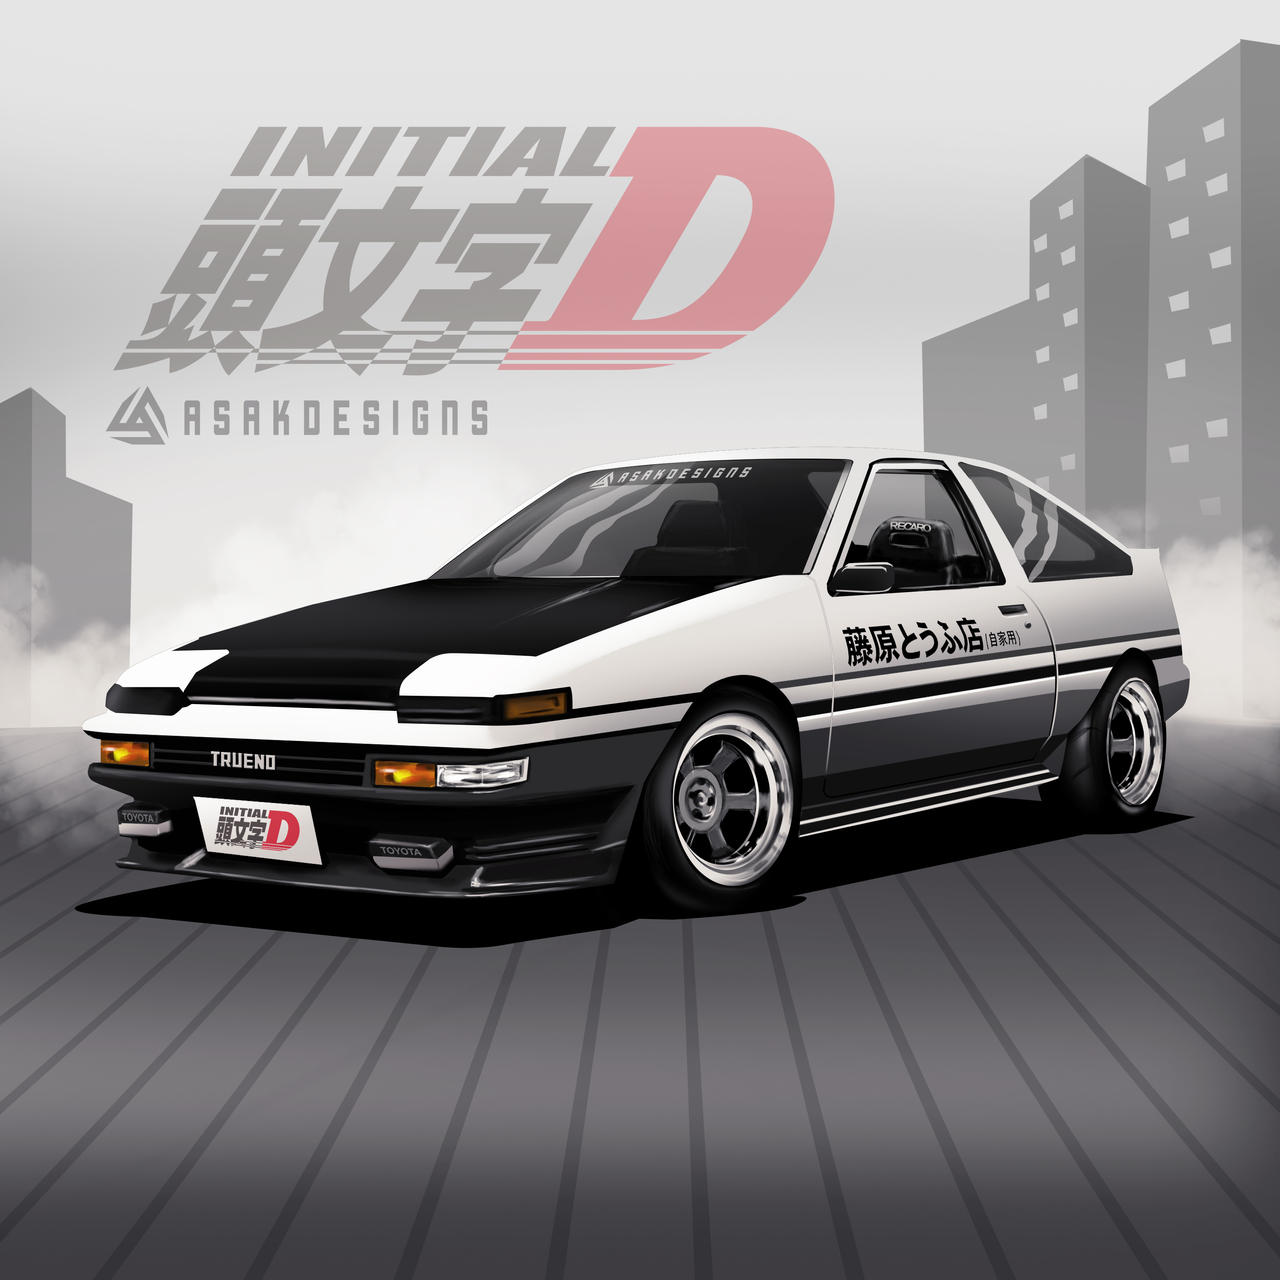 INITIAL D toyota AE86 illsutration by ASAKDESIGNS on DeviantArt